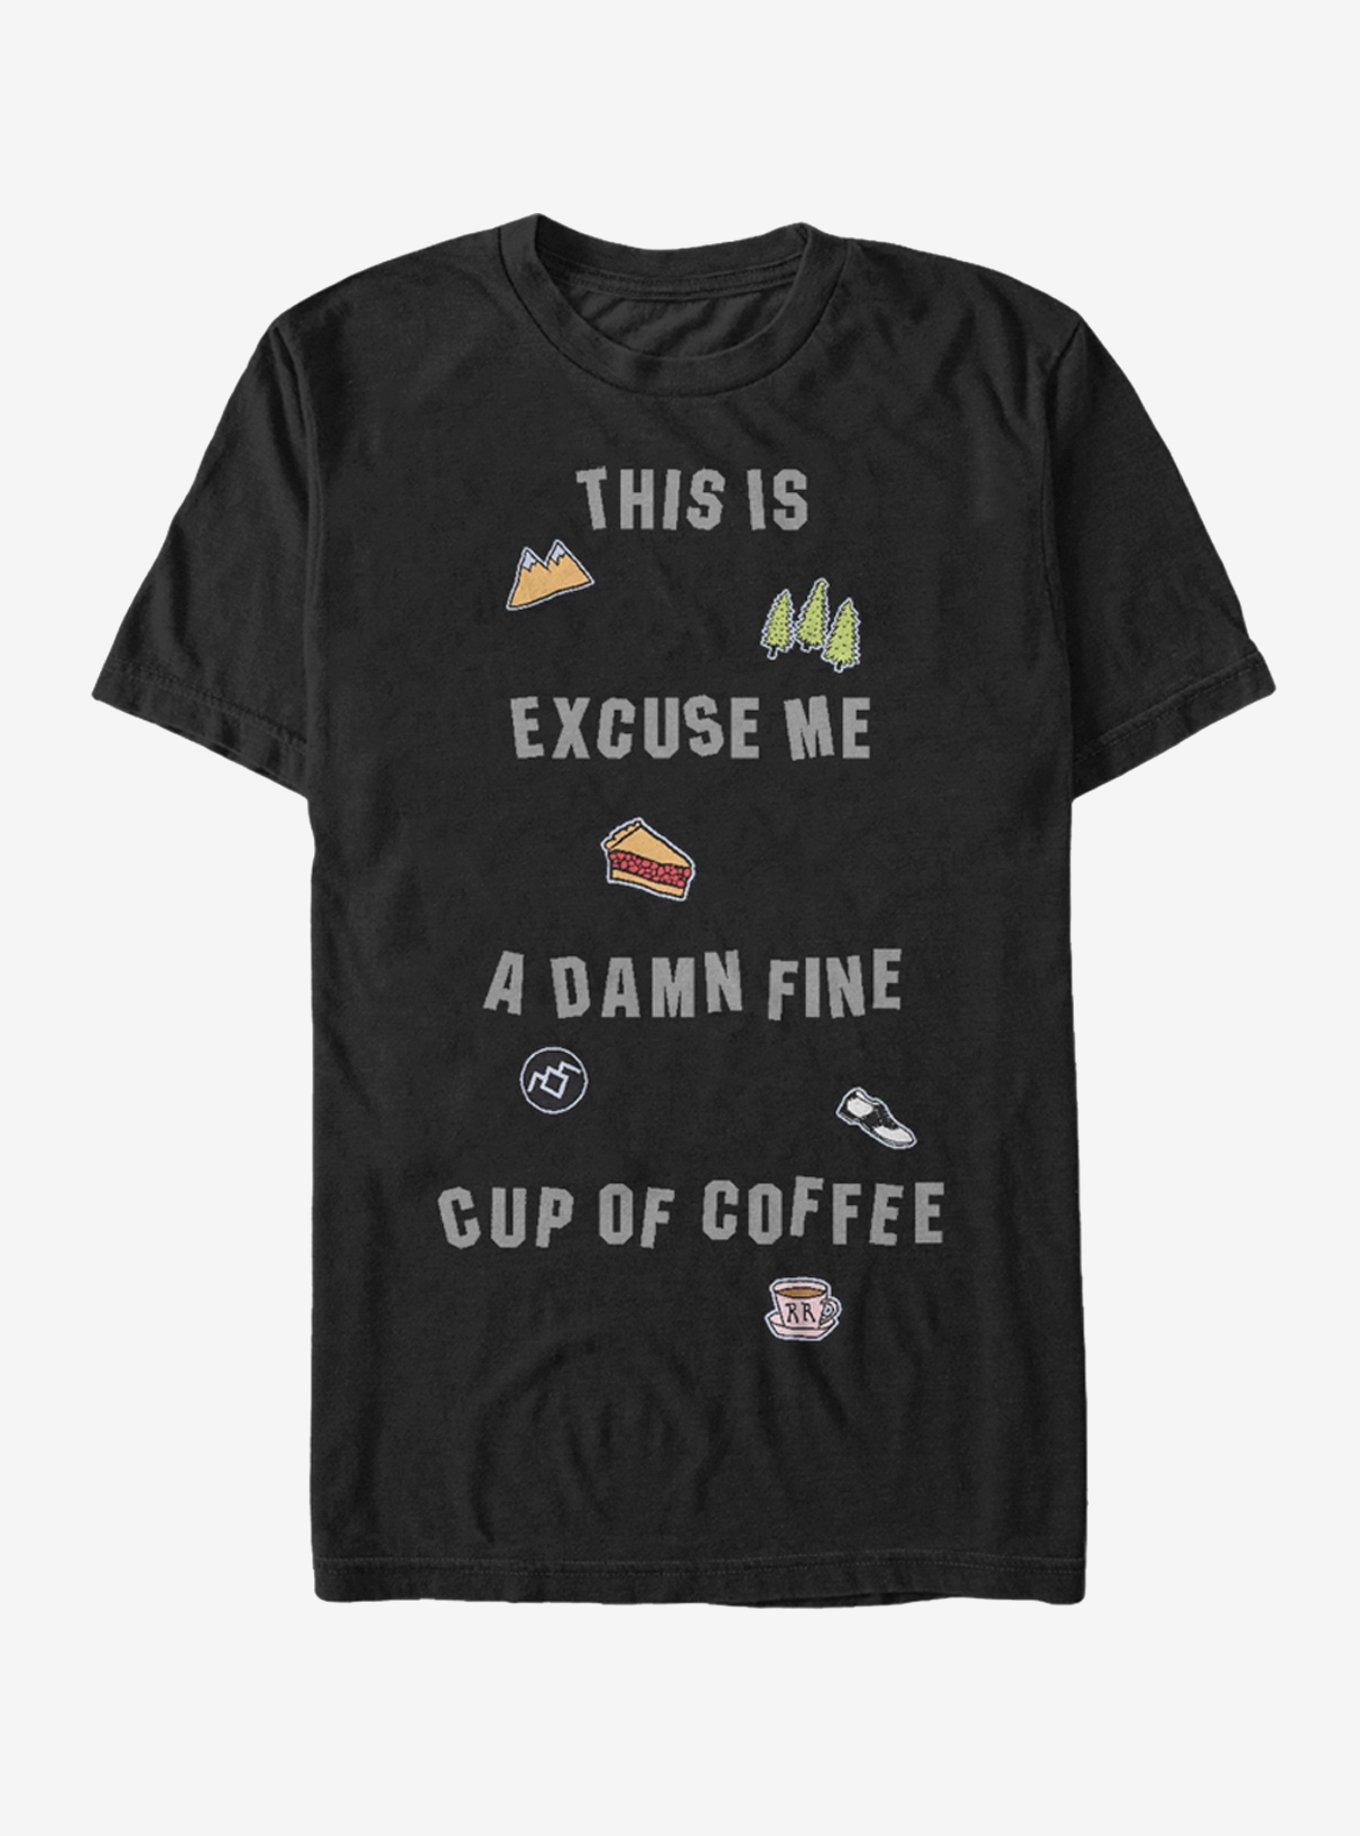 Twin Peaks Fine Cup of Coffee T-Shirt - BLACK | Hot Topic